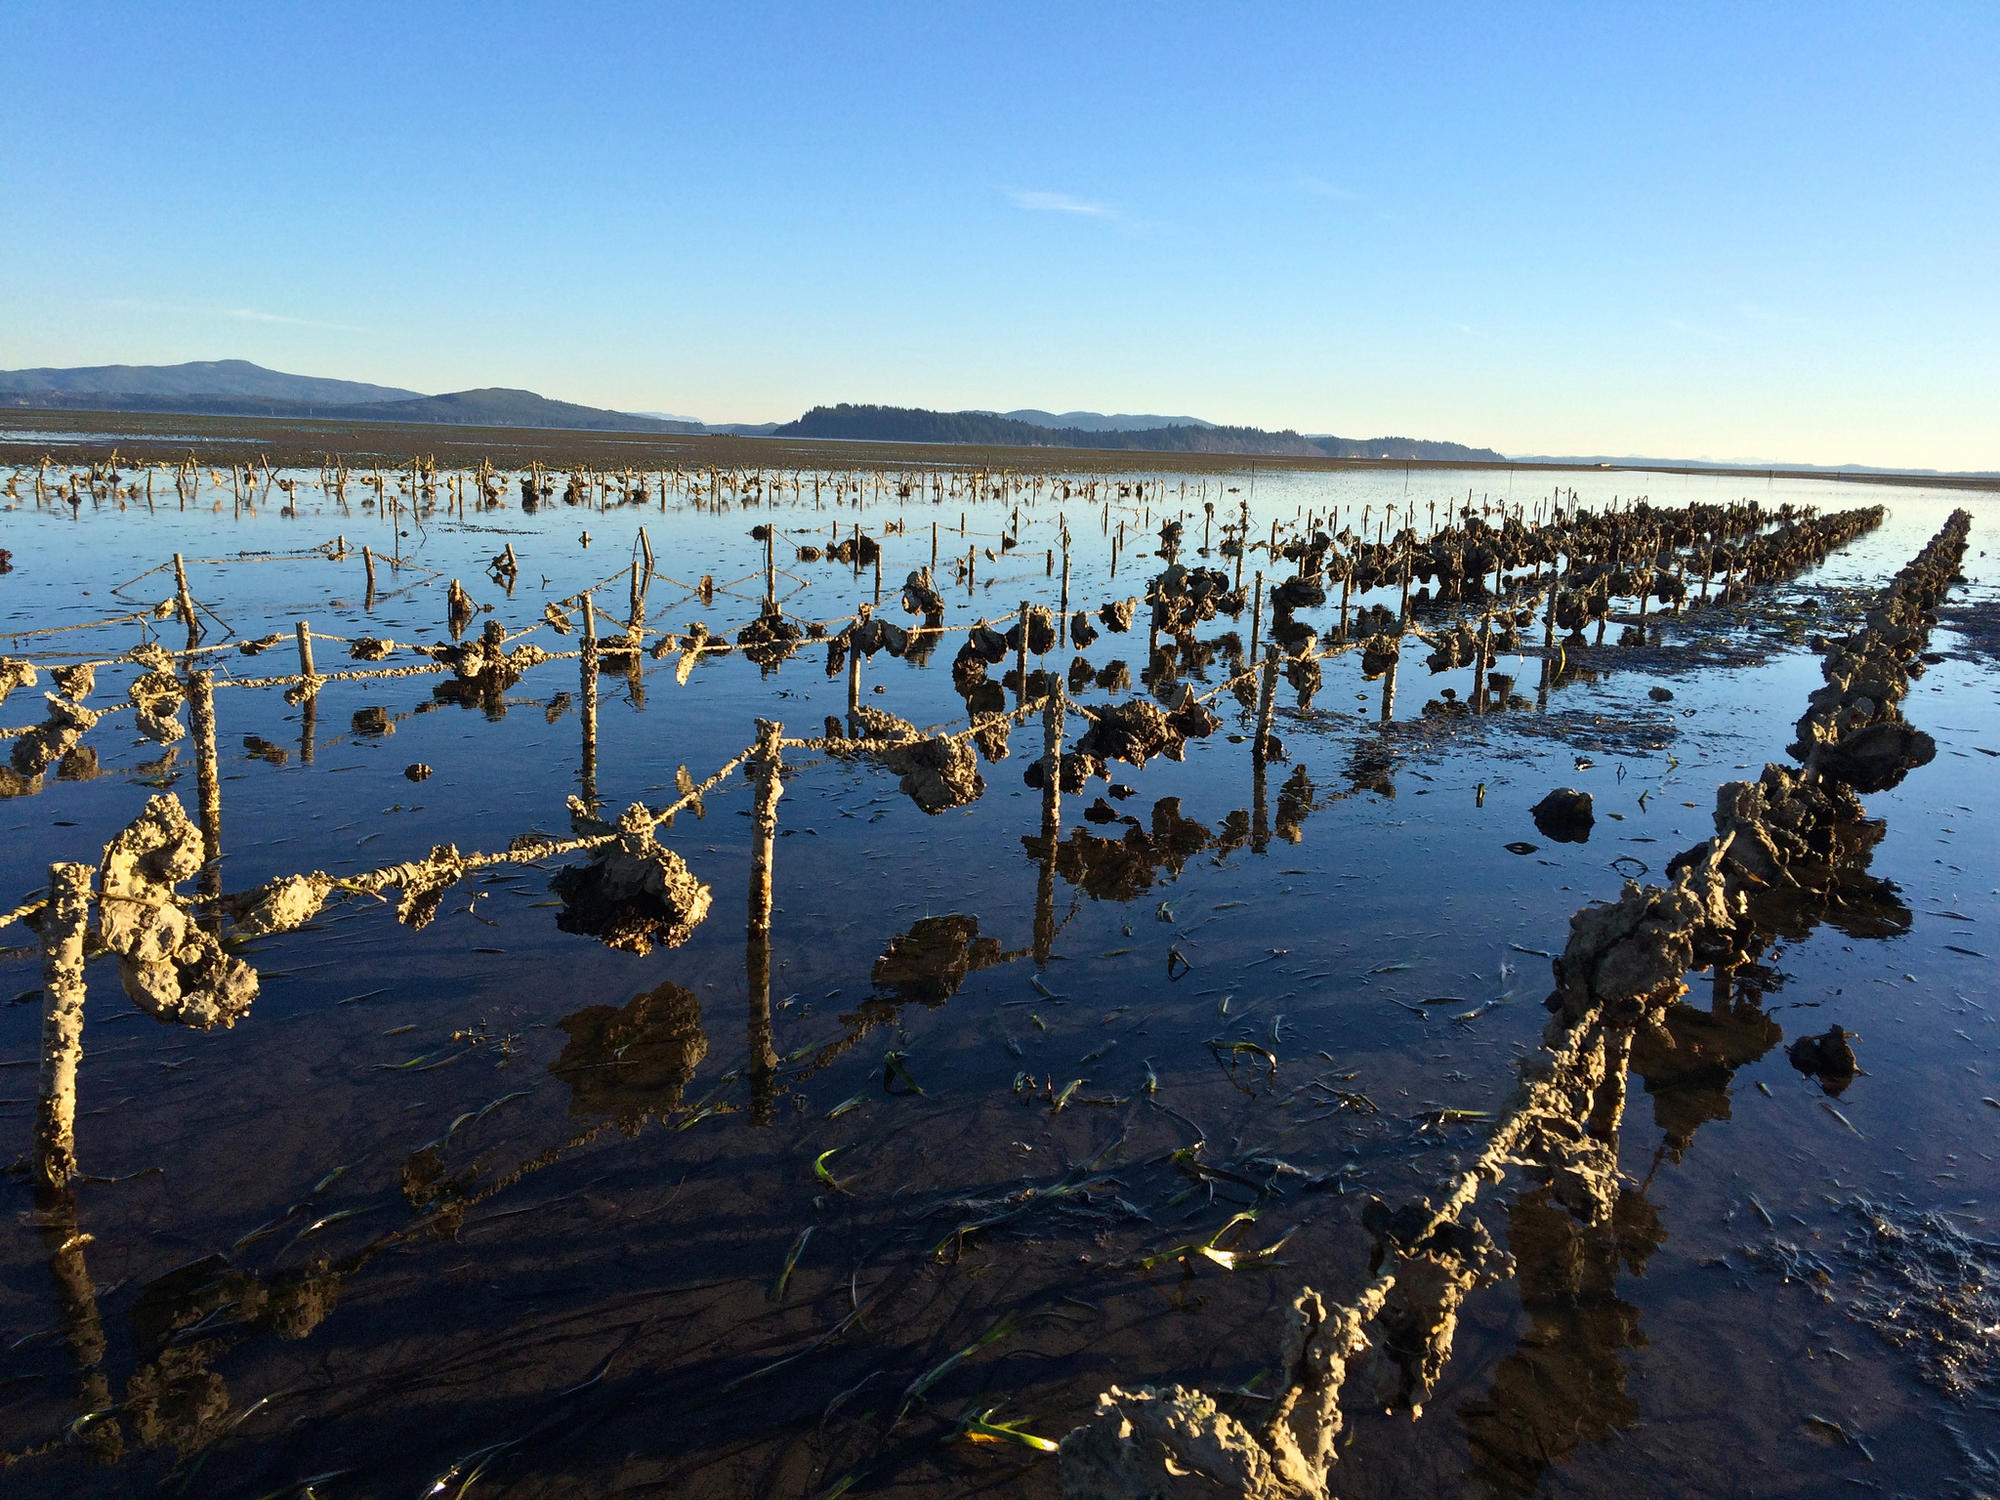 Can oyster farms make Puget Sound a little more wild? | Crosscut